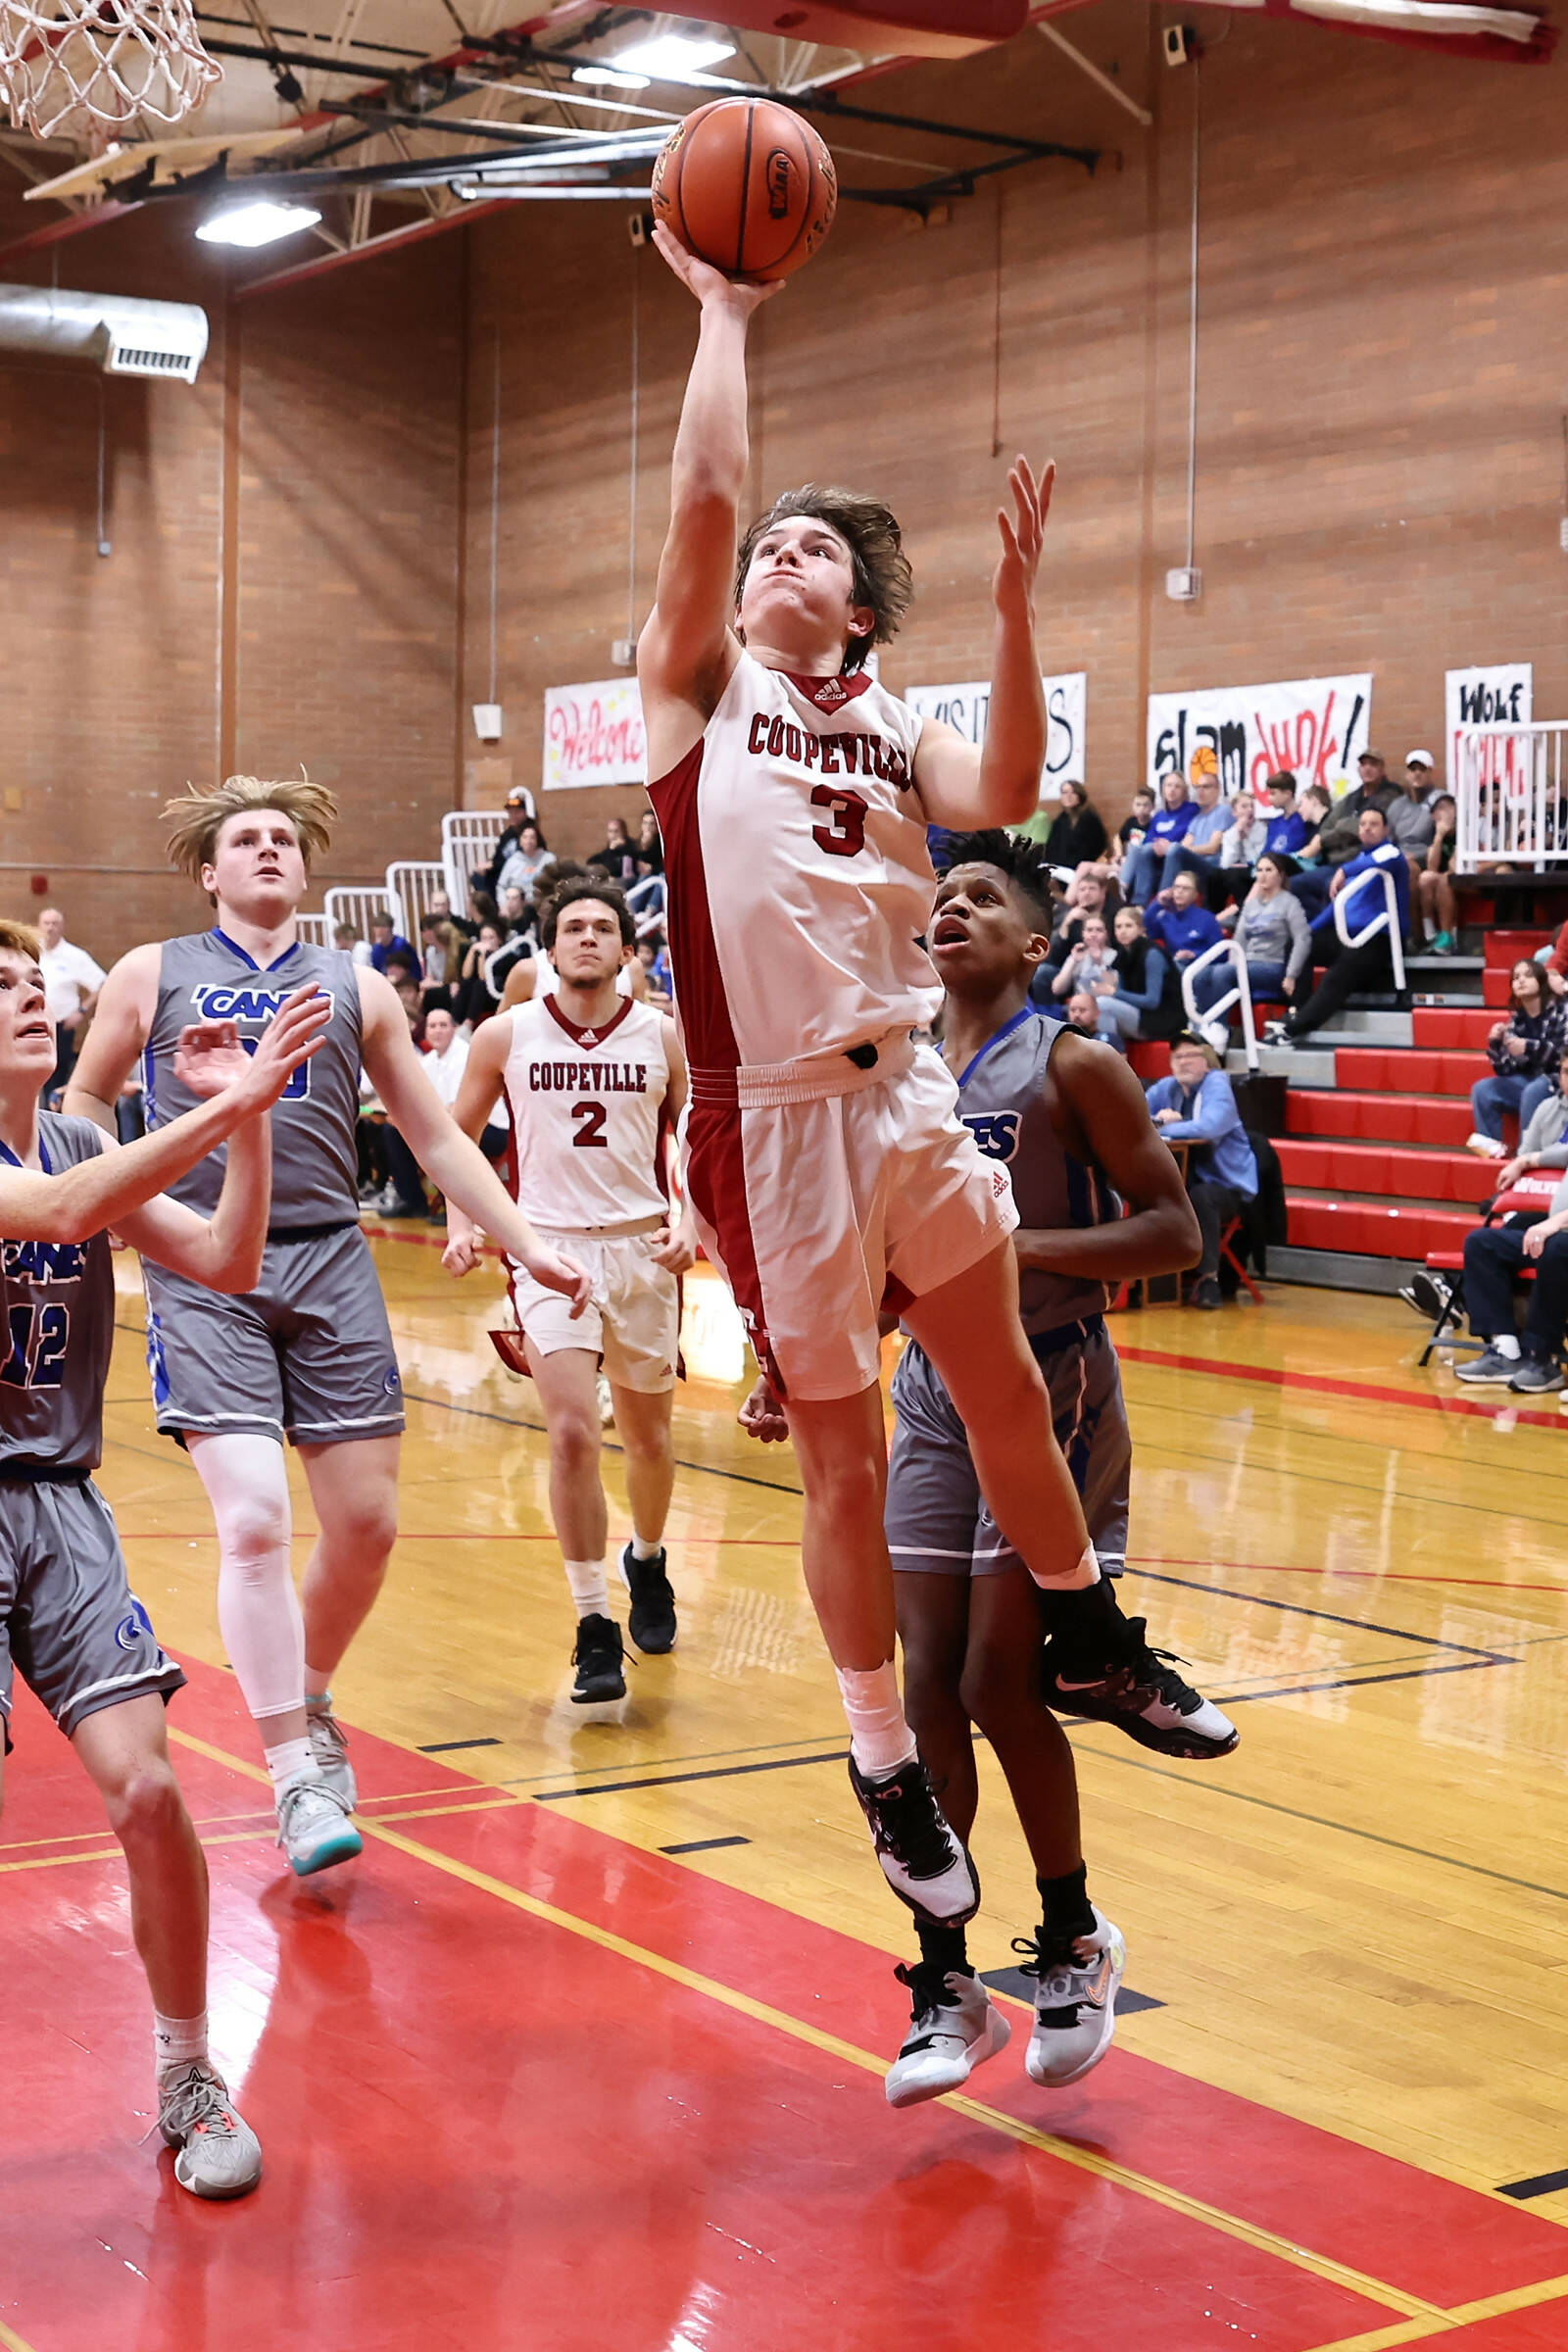 Coupeville junior Logan Downes takes a shot in a varsity basketball game against Mount Vernon Christian on Tuesday. Downes scored a total of 28 points for the Wolves during the Jan. 10 game. The Wolves won 44-39, bringing their record to 6-5 for the season. (Photo by John Fisken)